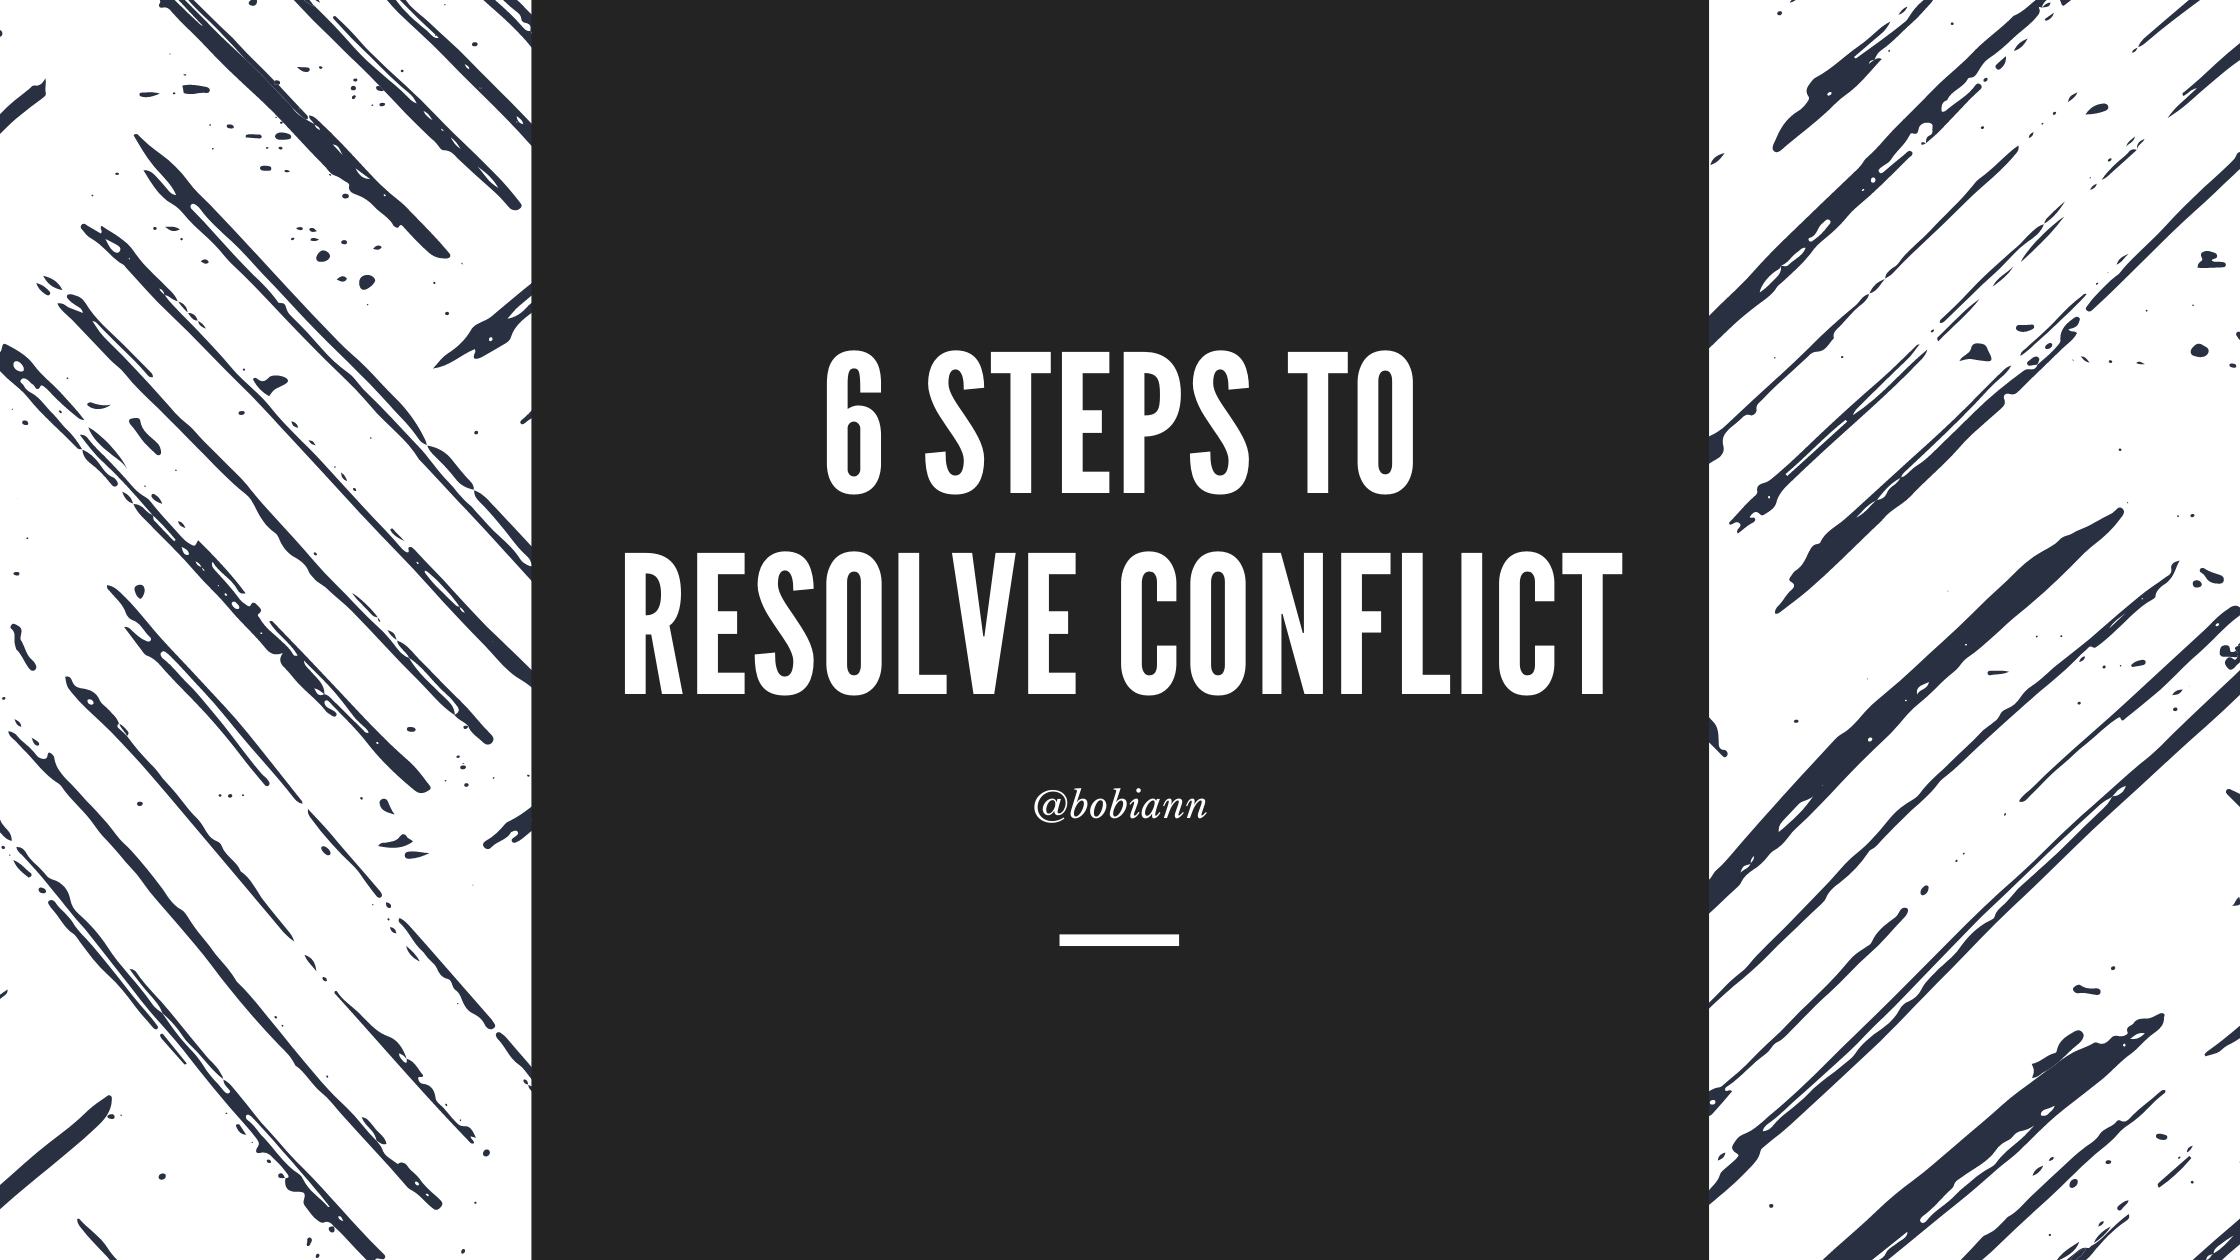 6 Steps to Resolve Conflict